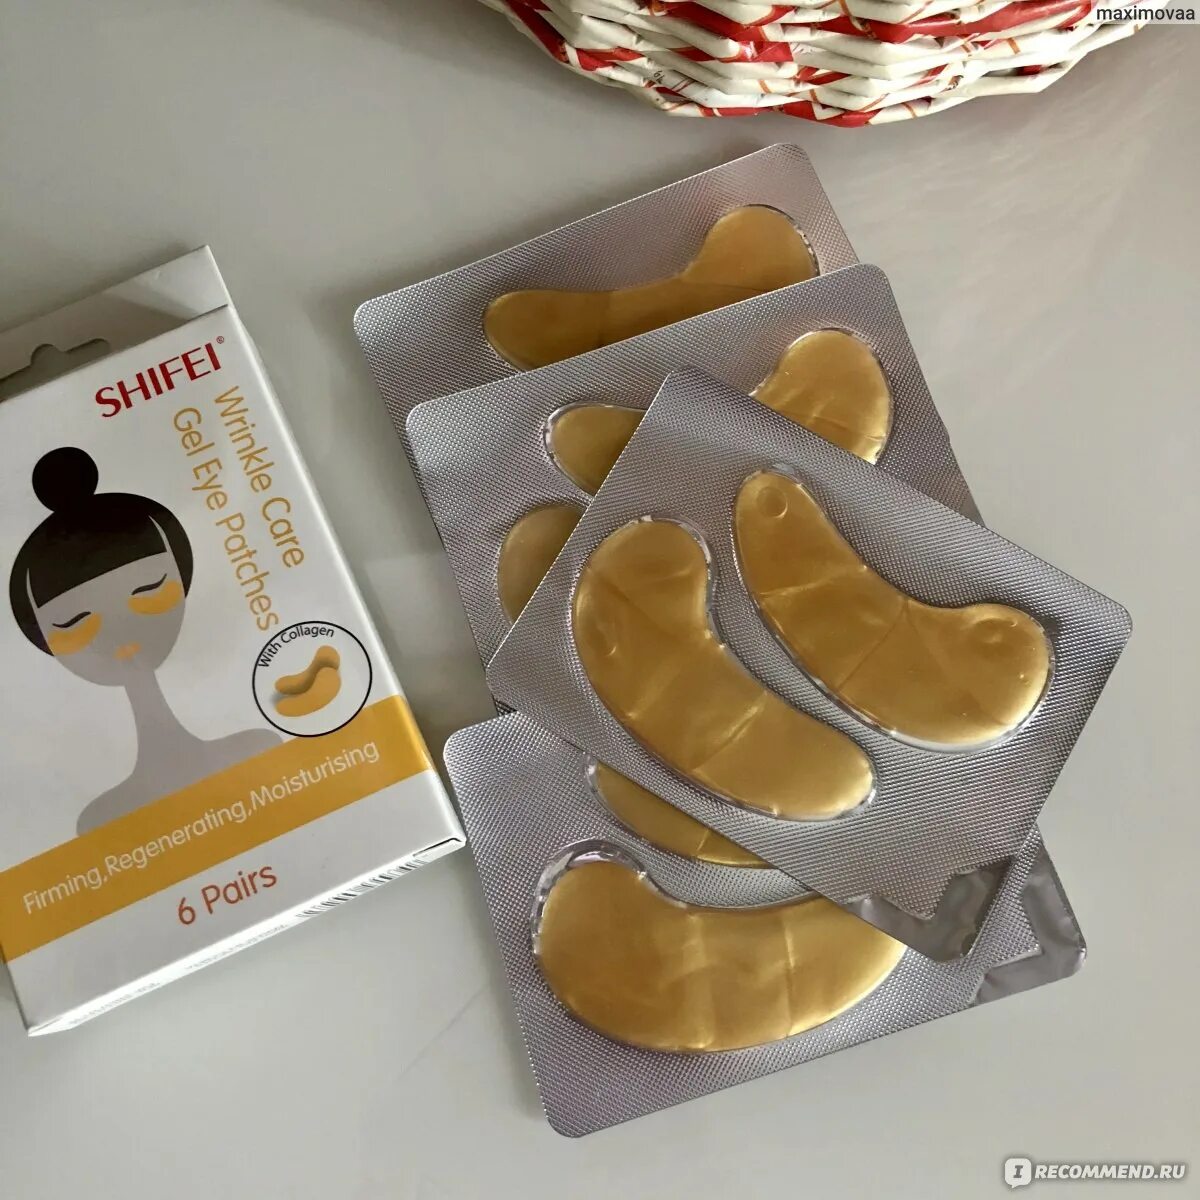 SHIFEI гелевые патчи Wrinkle Care Gel Eye Patches.